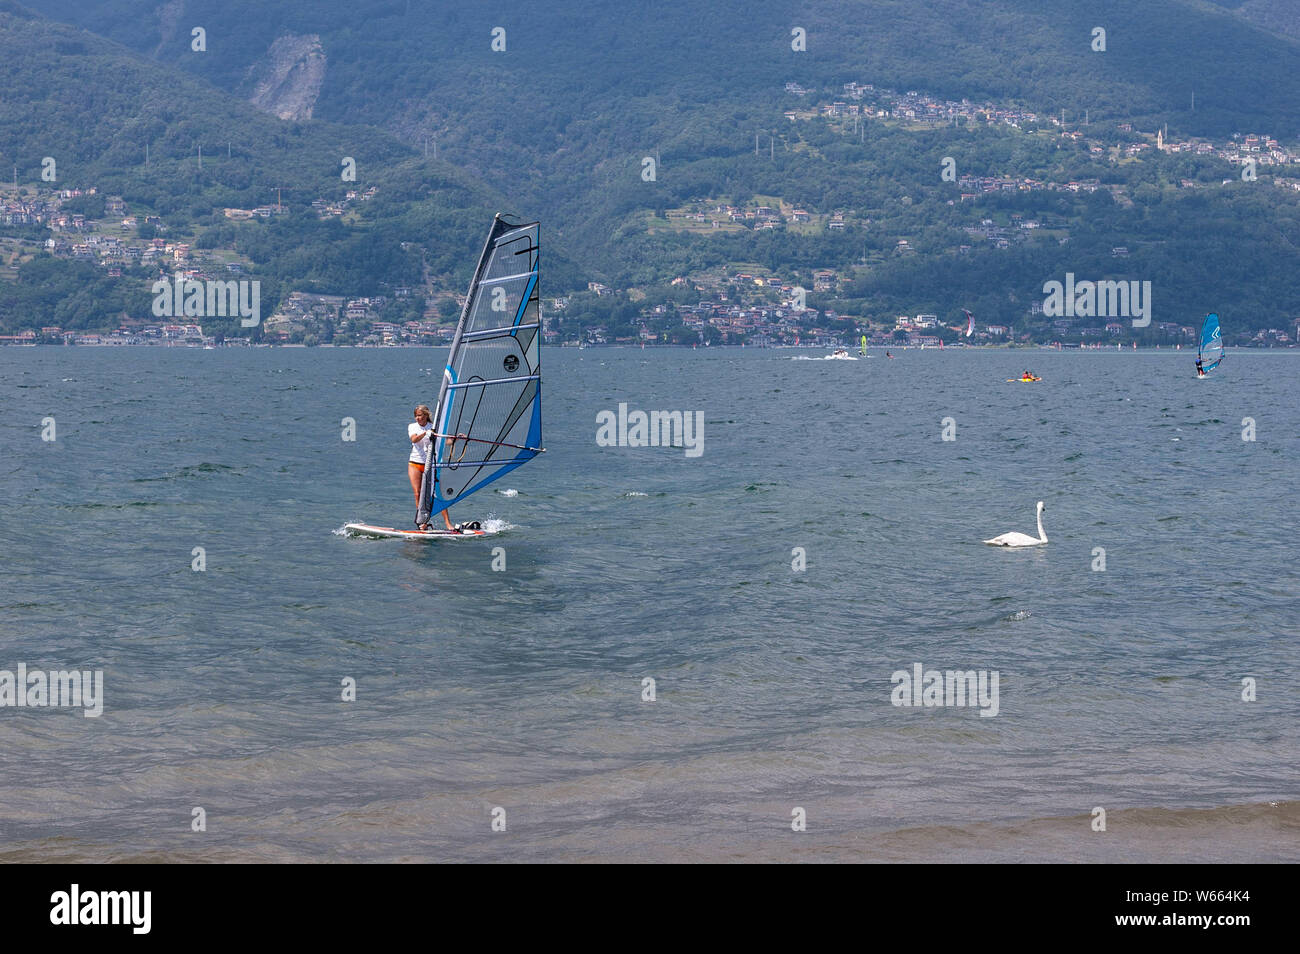 Lake Como, Italy - July 21, 2019. Water sport: woman windsurfer surfing the wind on waves on a bright sunny summer day near the Colico and swimming sw Stock Photo